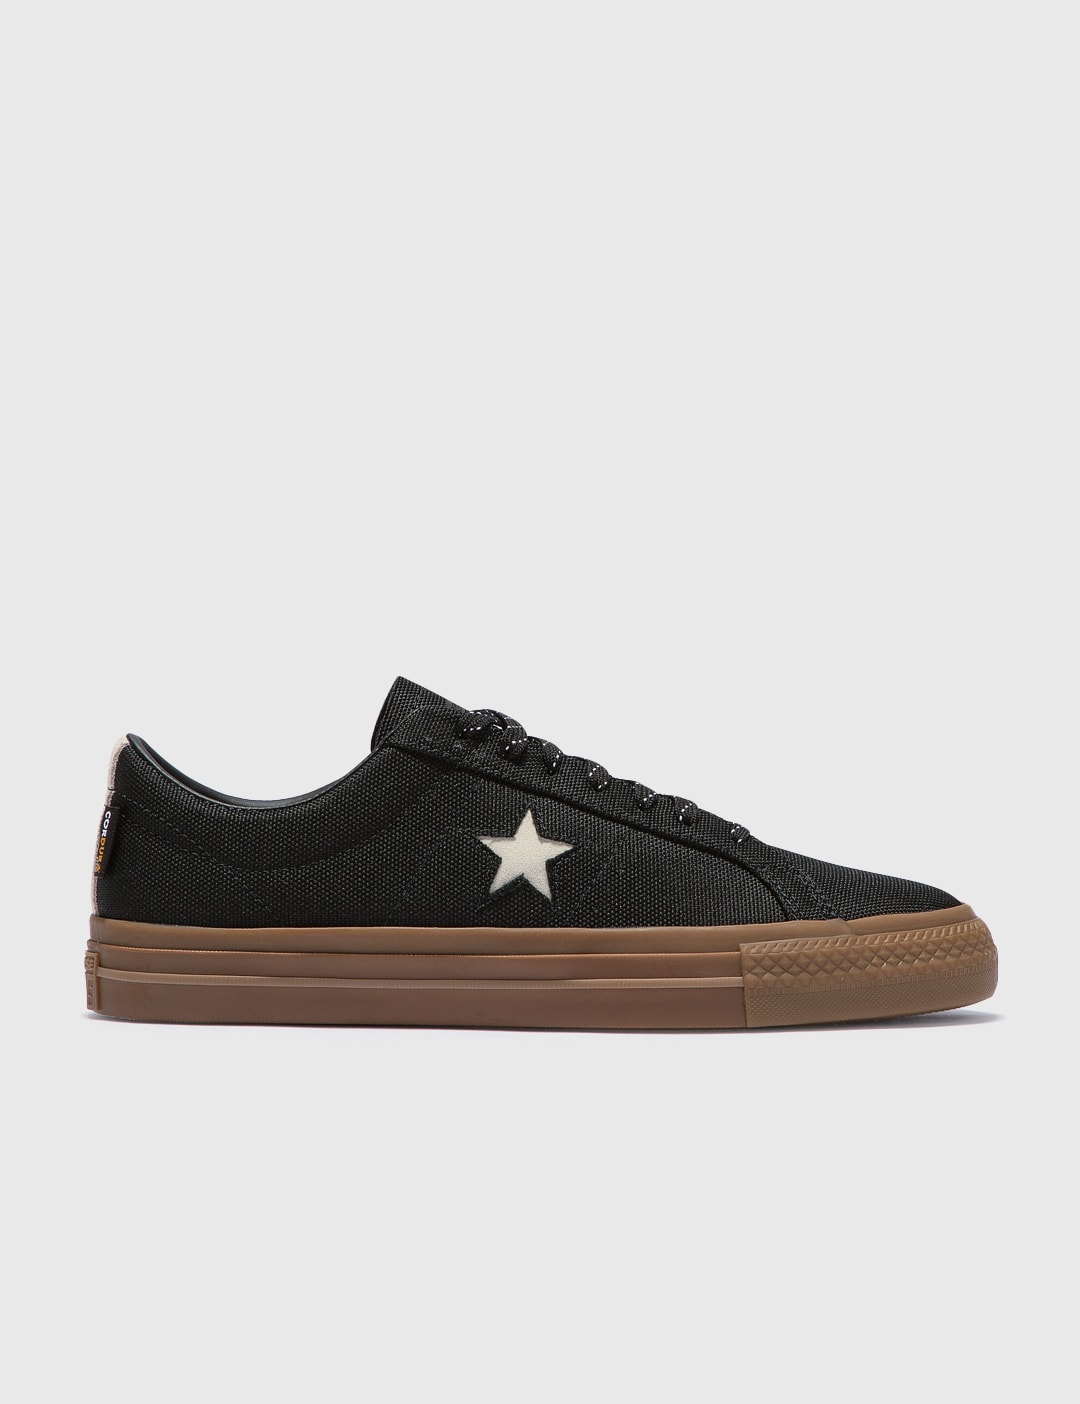 Converse - One Start Pro Cordura Canvas | HBX - Globally Curated ...